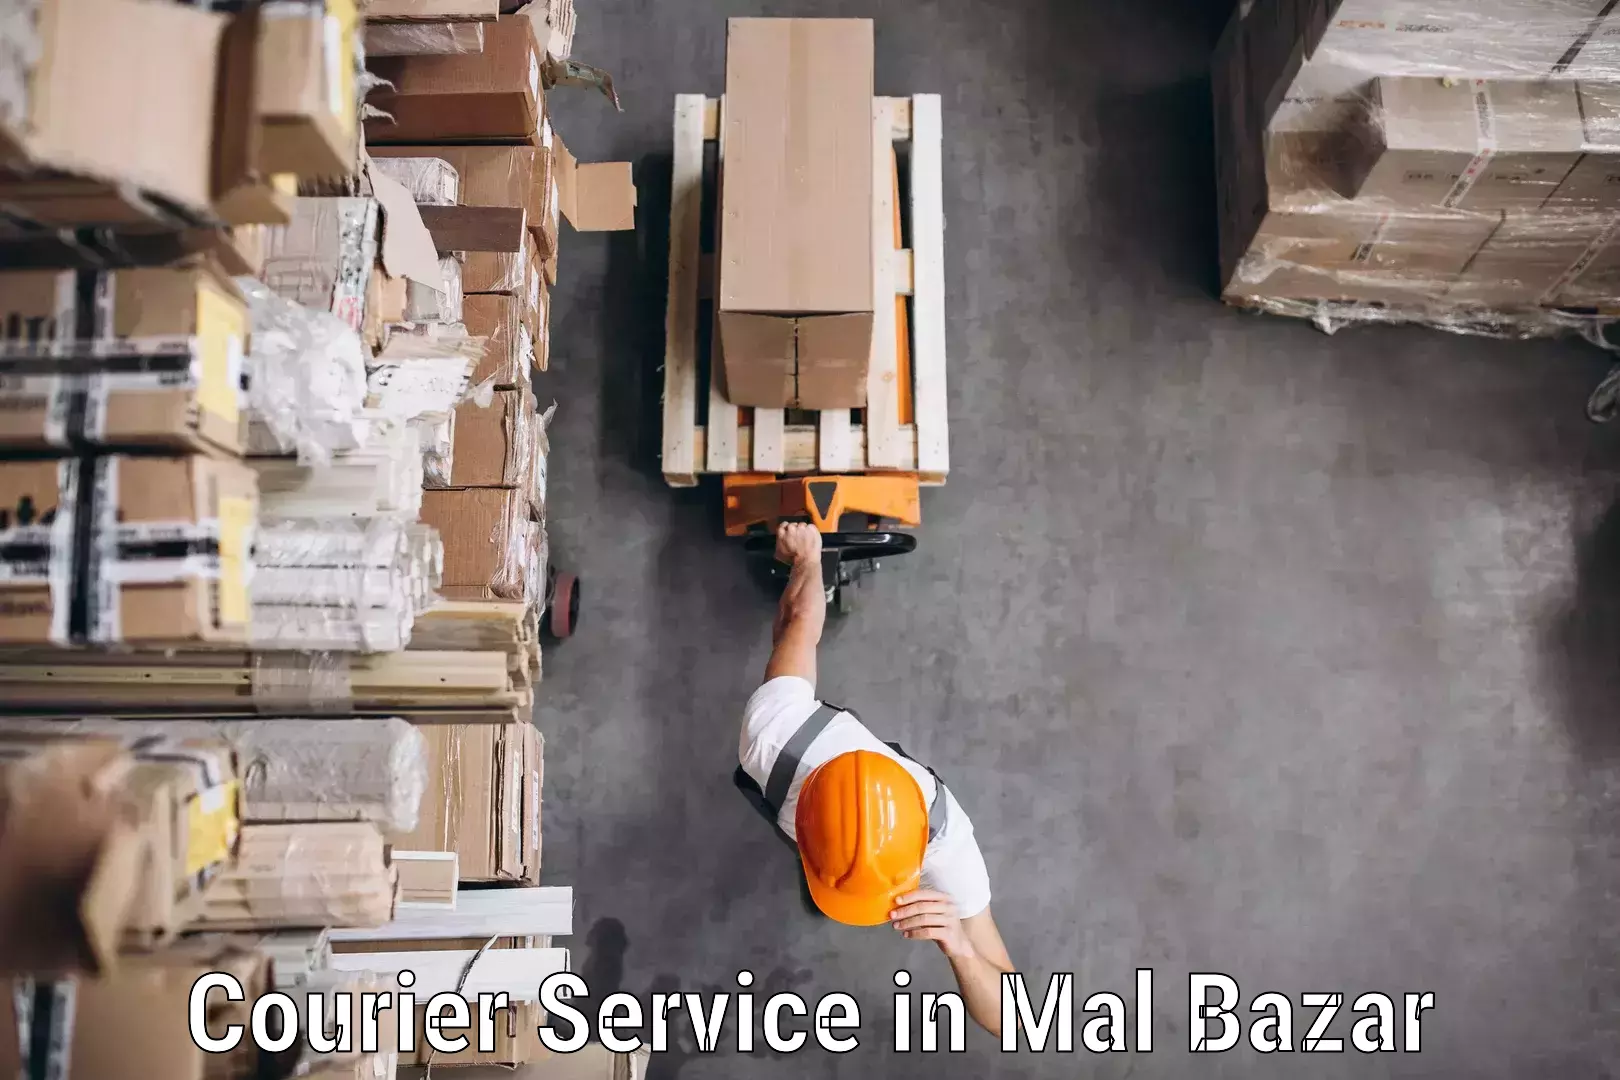 Multi-national courier services in Mal Bazar